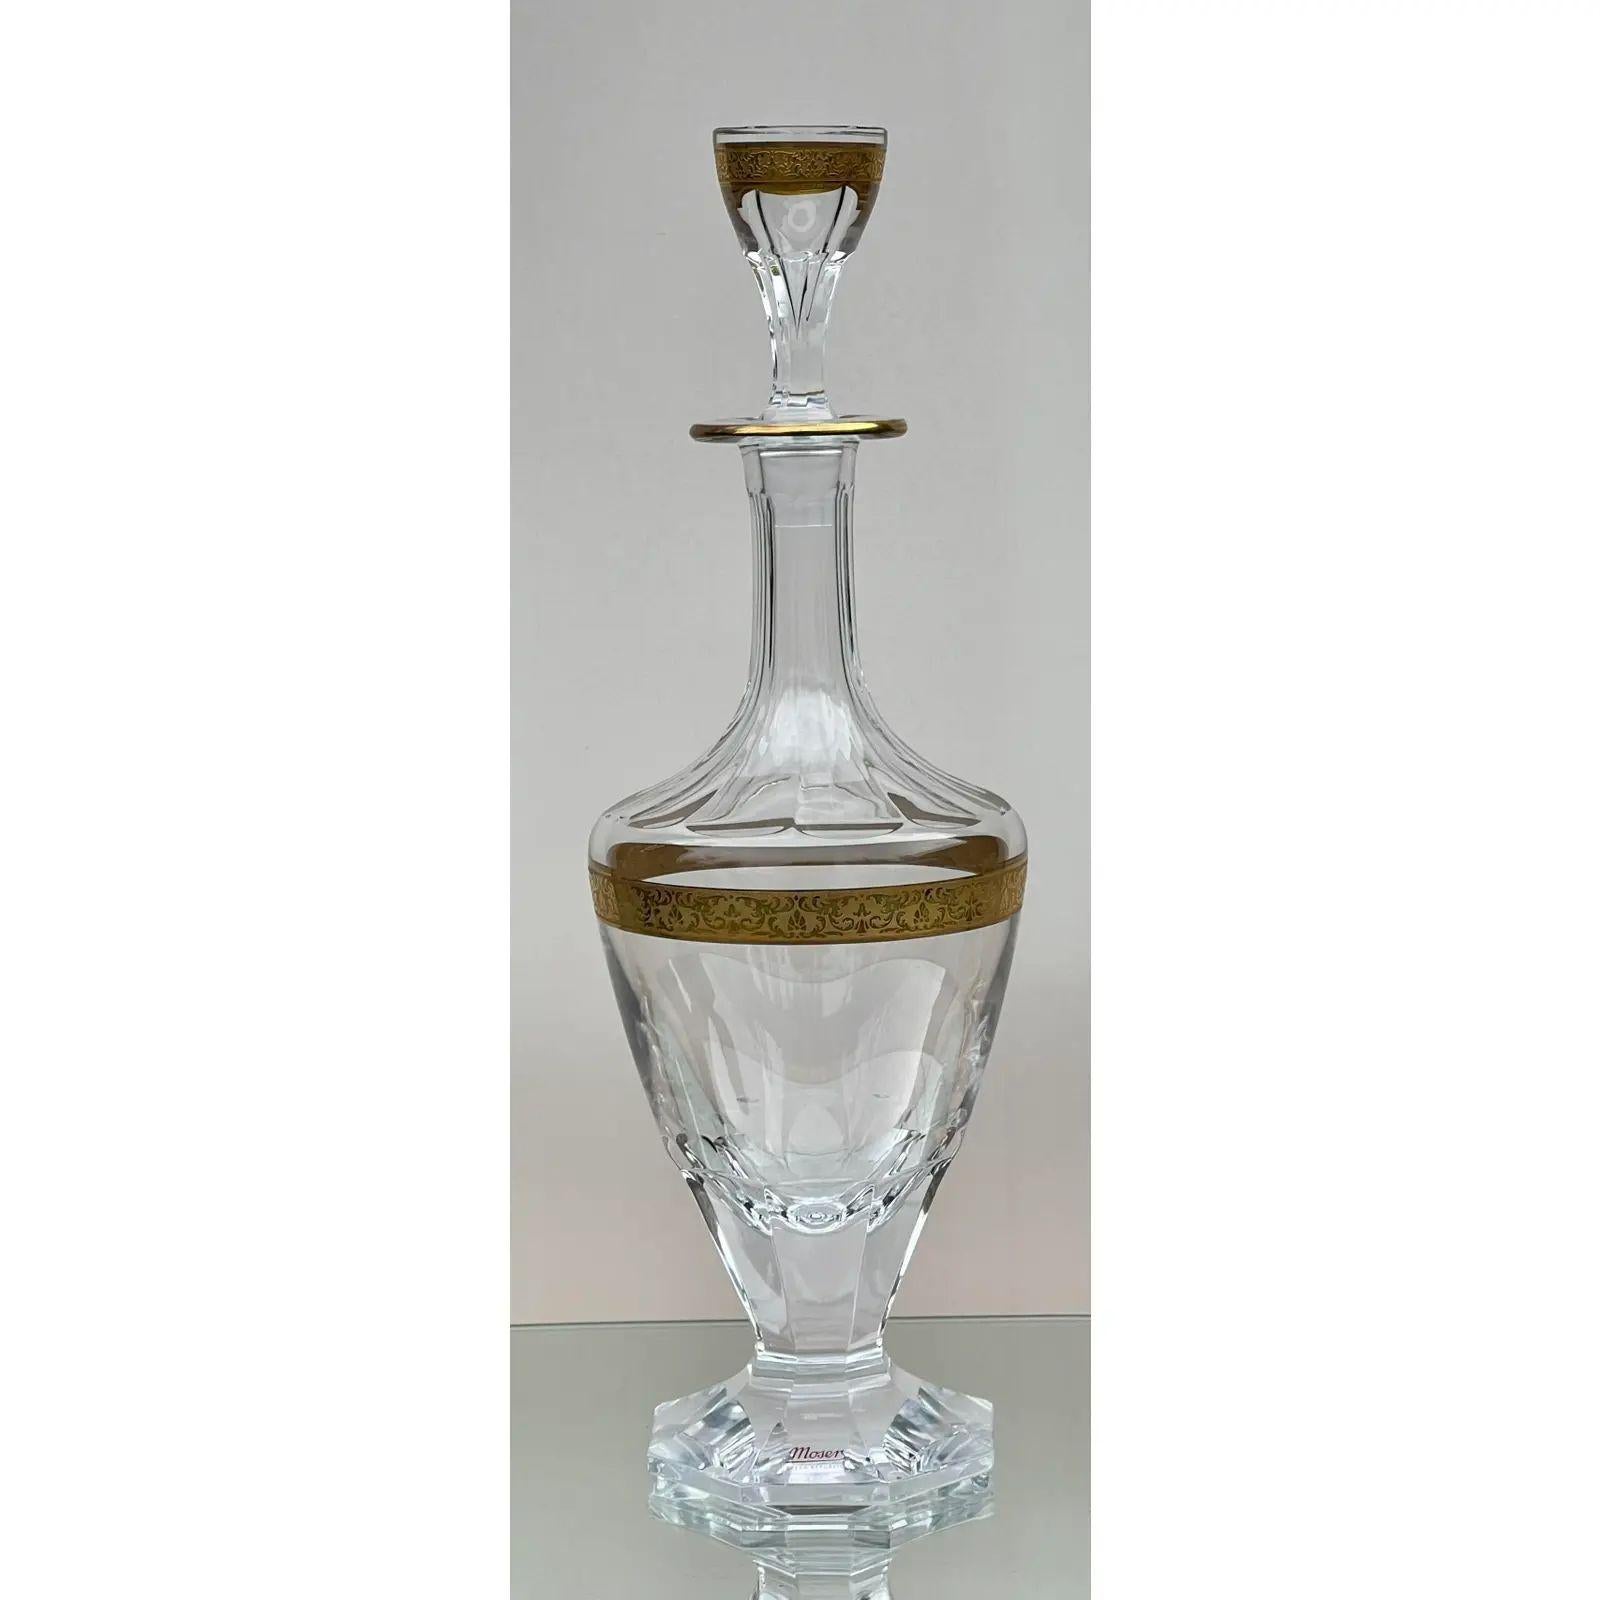 20th Century Moser Gold Encrusted Crystal Carlsbad Decanter, 1980s